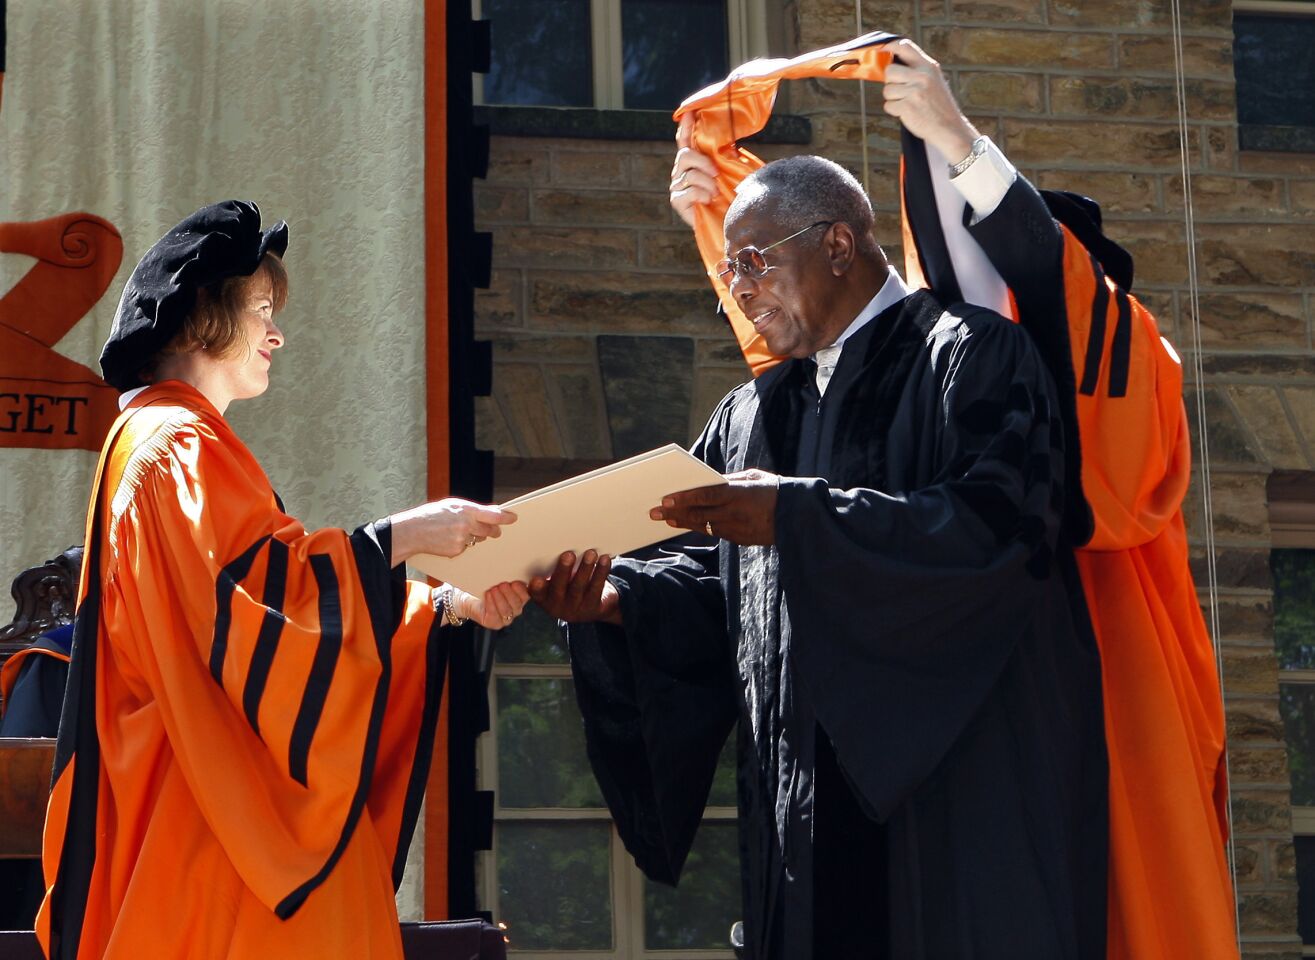 Hank Aaron is awarded an honorary doctorate of humanities at Princeton University